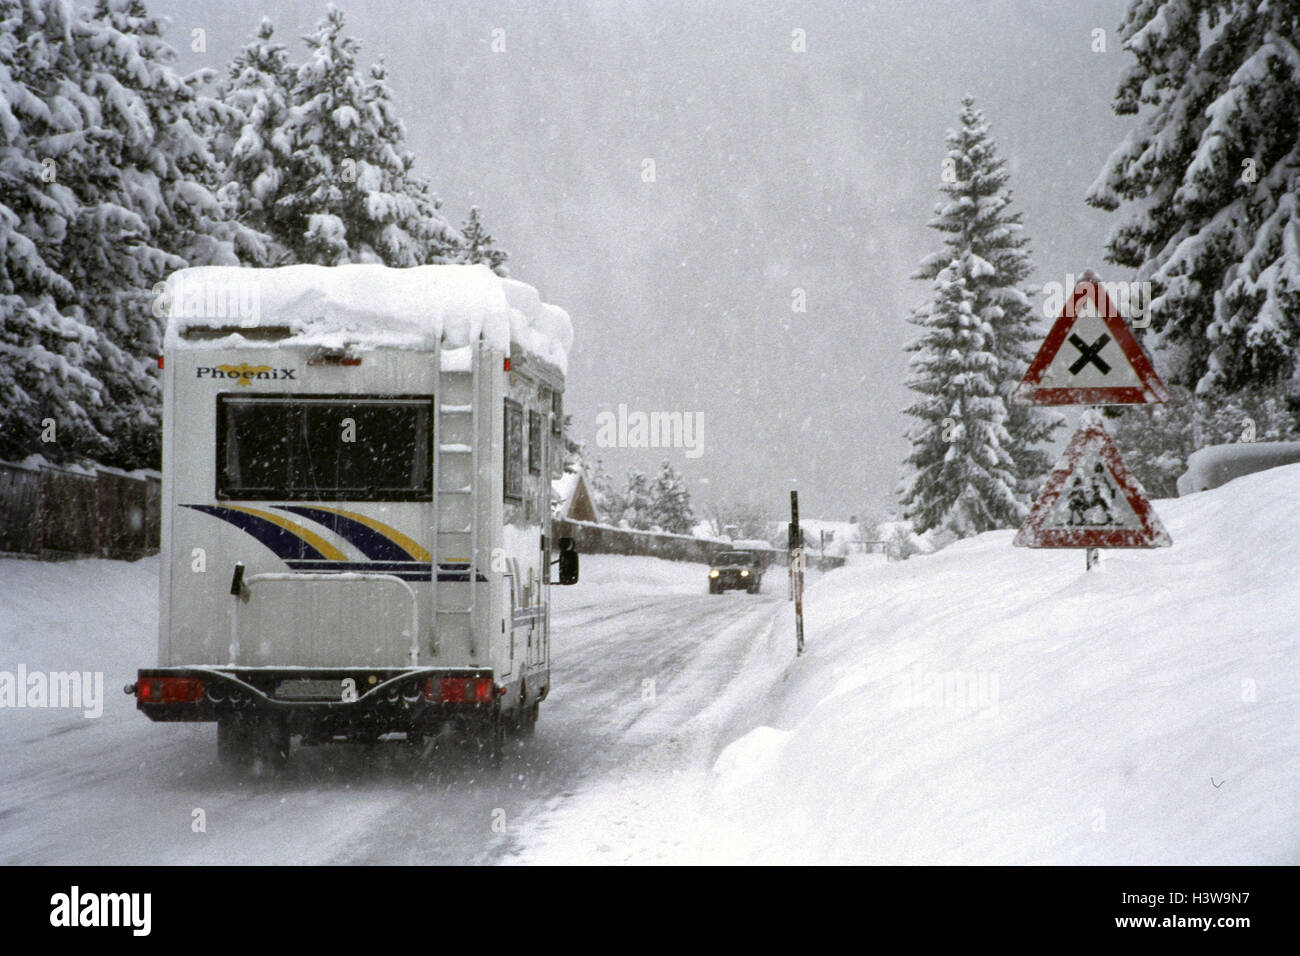 Winters, federal highway, traffic, snow-covered road, passenger car, camper mark make unrecognizable wintry street relations, traffic, wintry, traffic signs, road sign, 'attention, children', snowfall, bad view, street, motor traffic, cars, passenger car, Stock Photo